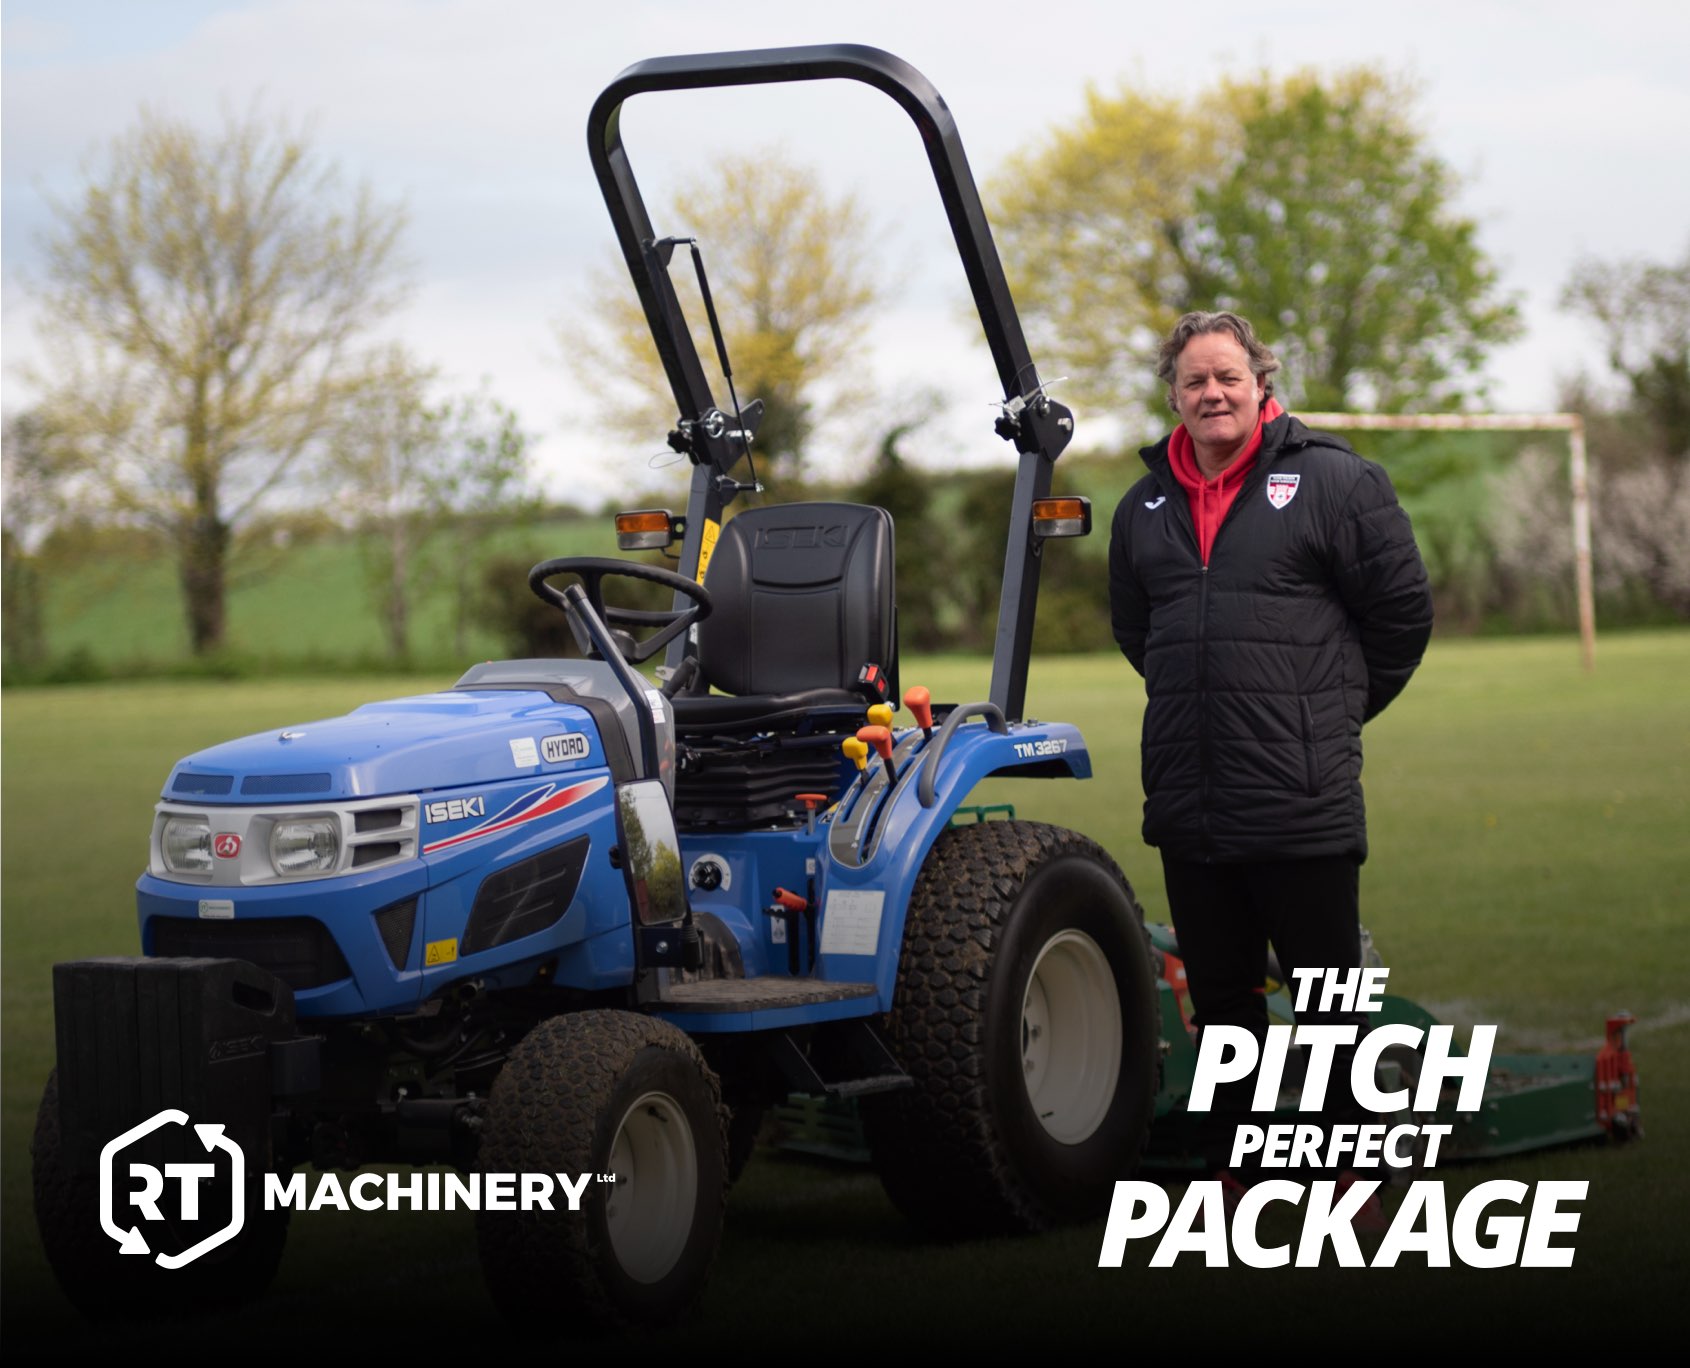 Perfect Pitch Combo Changes the Game for Totternhoe FC